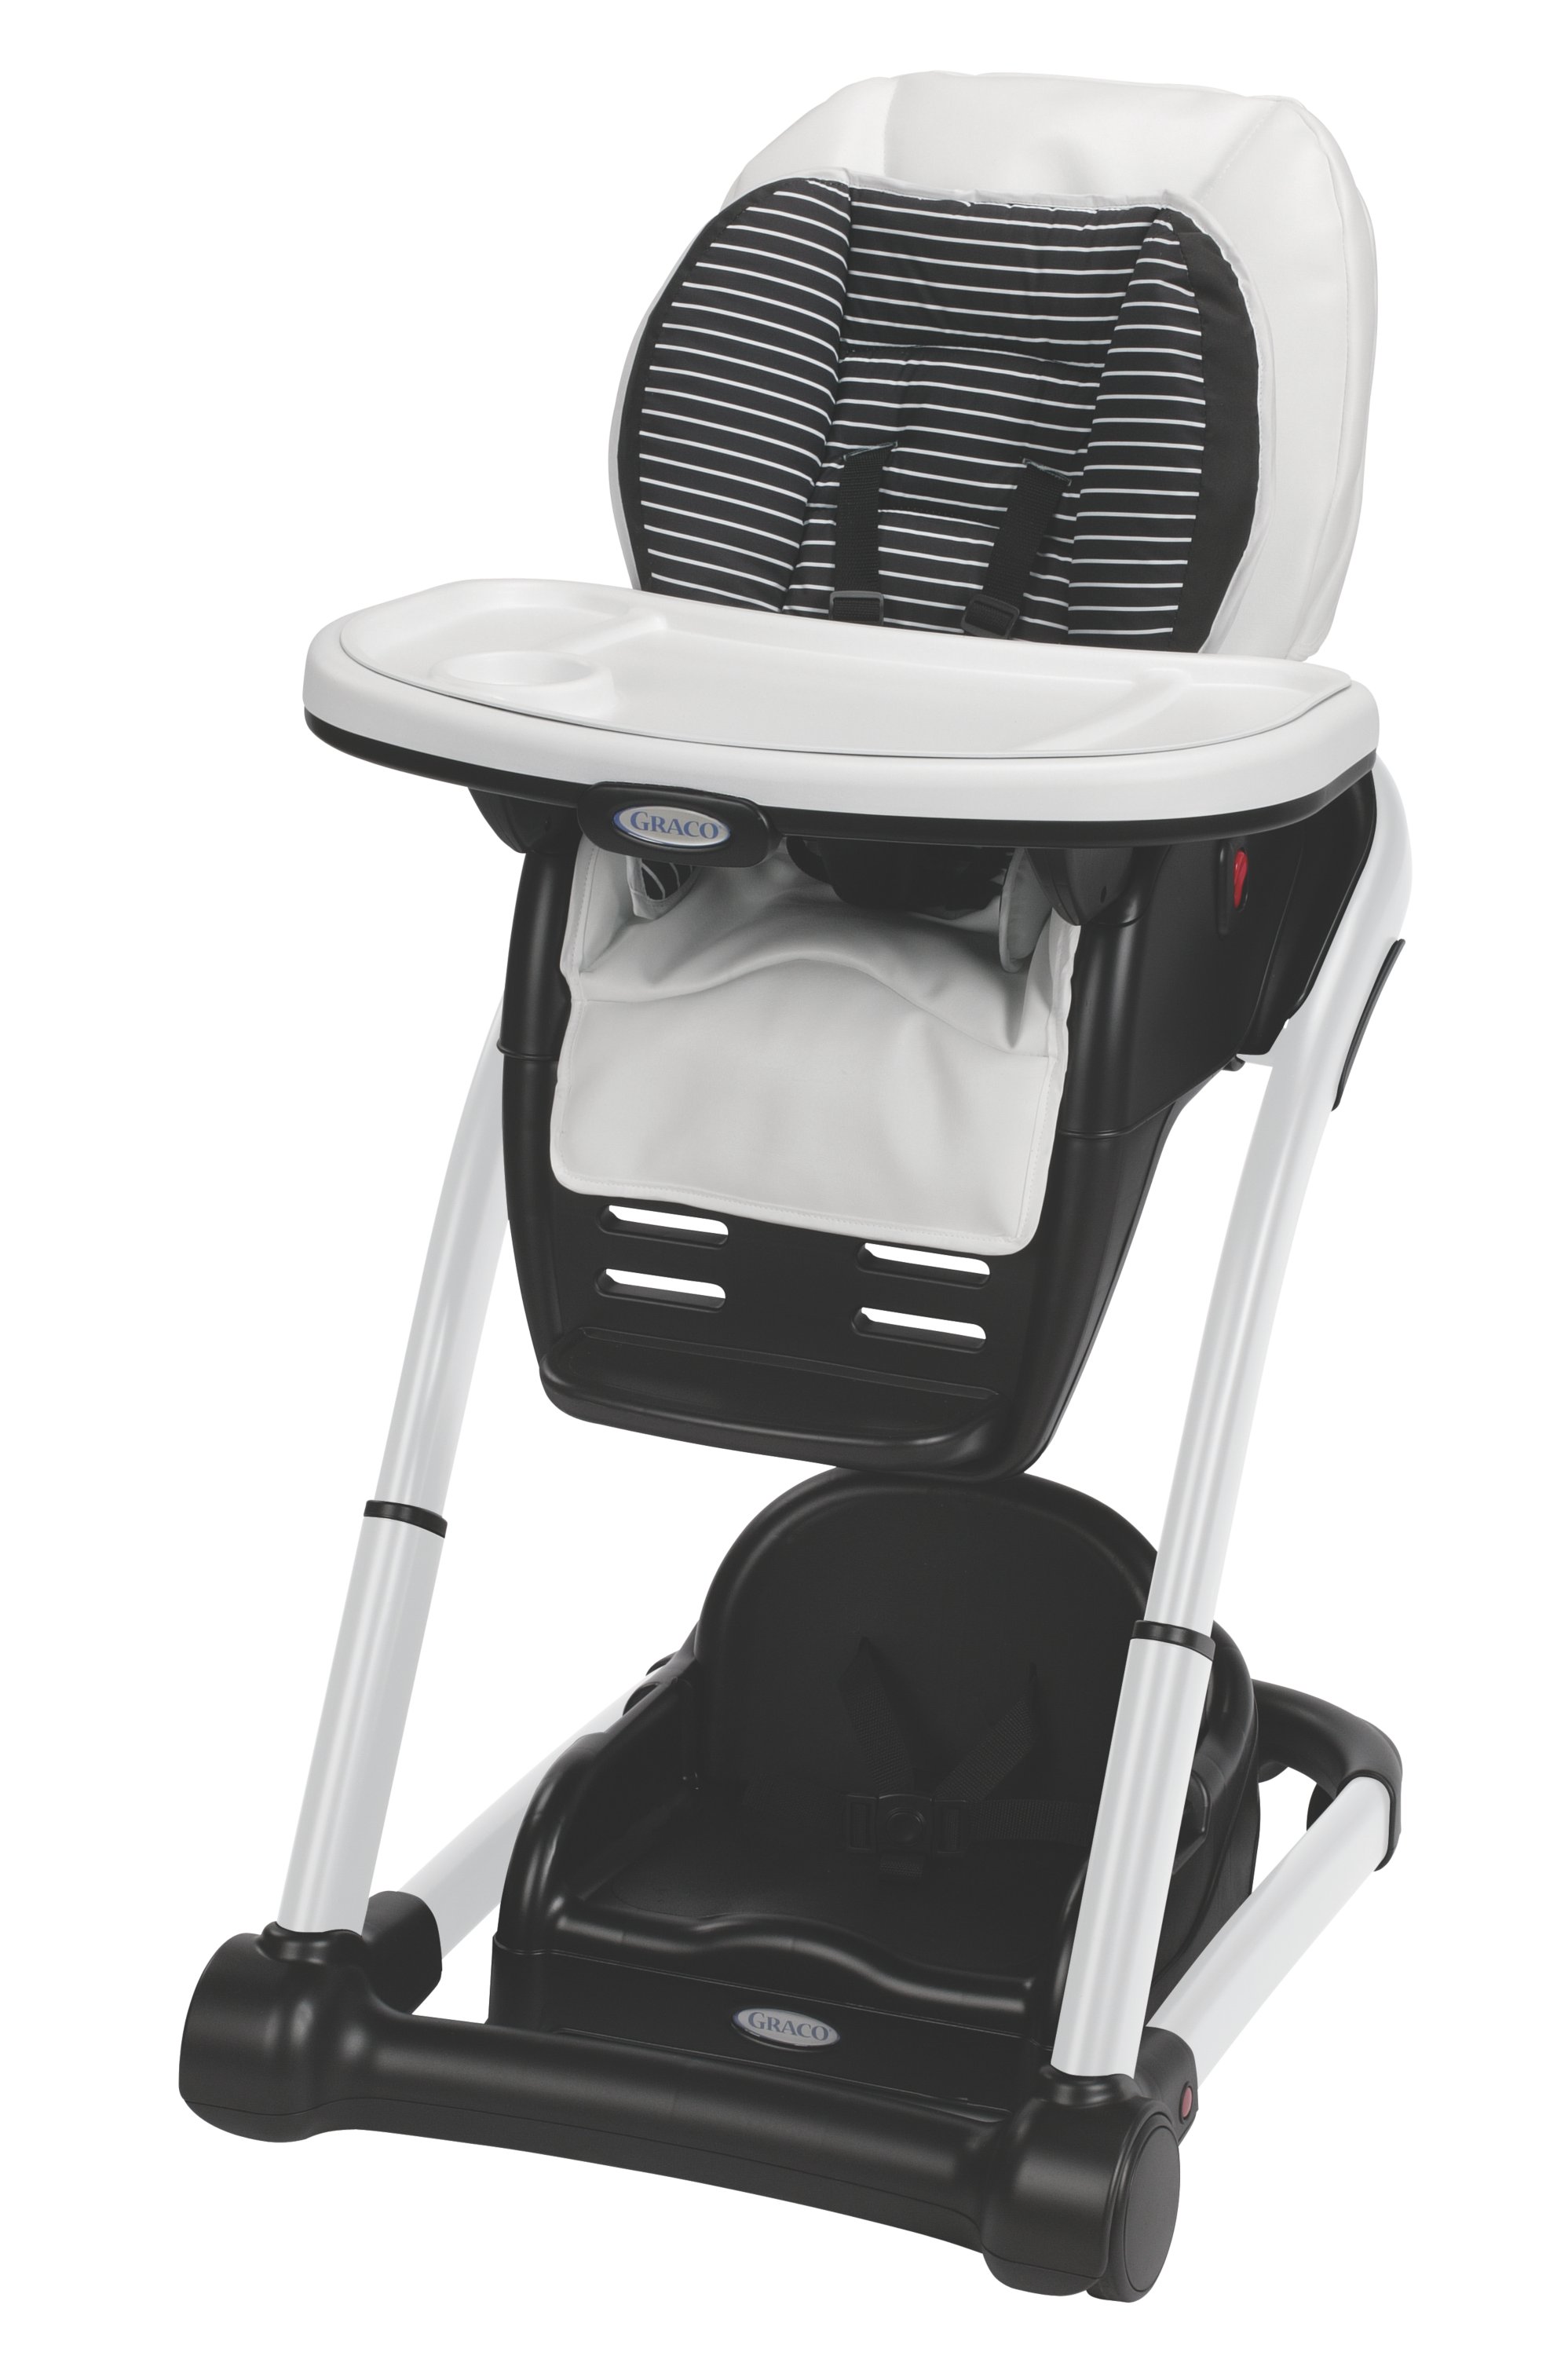 Blossom™ 6-in-1 Convertible High Chair